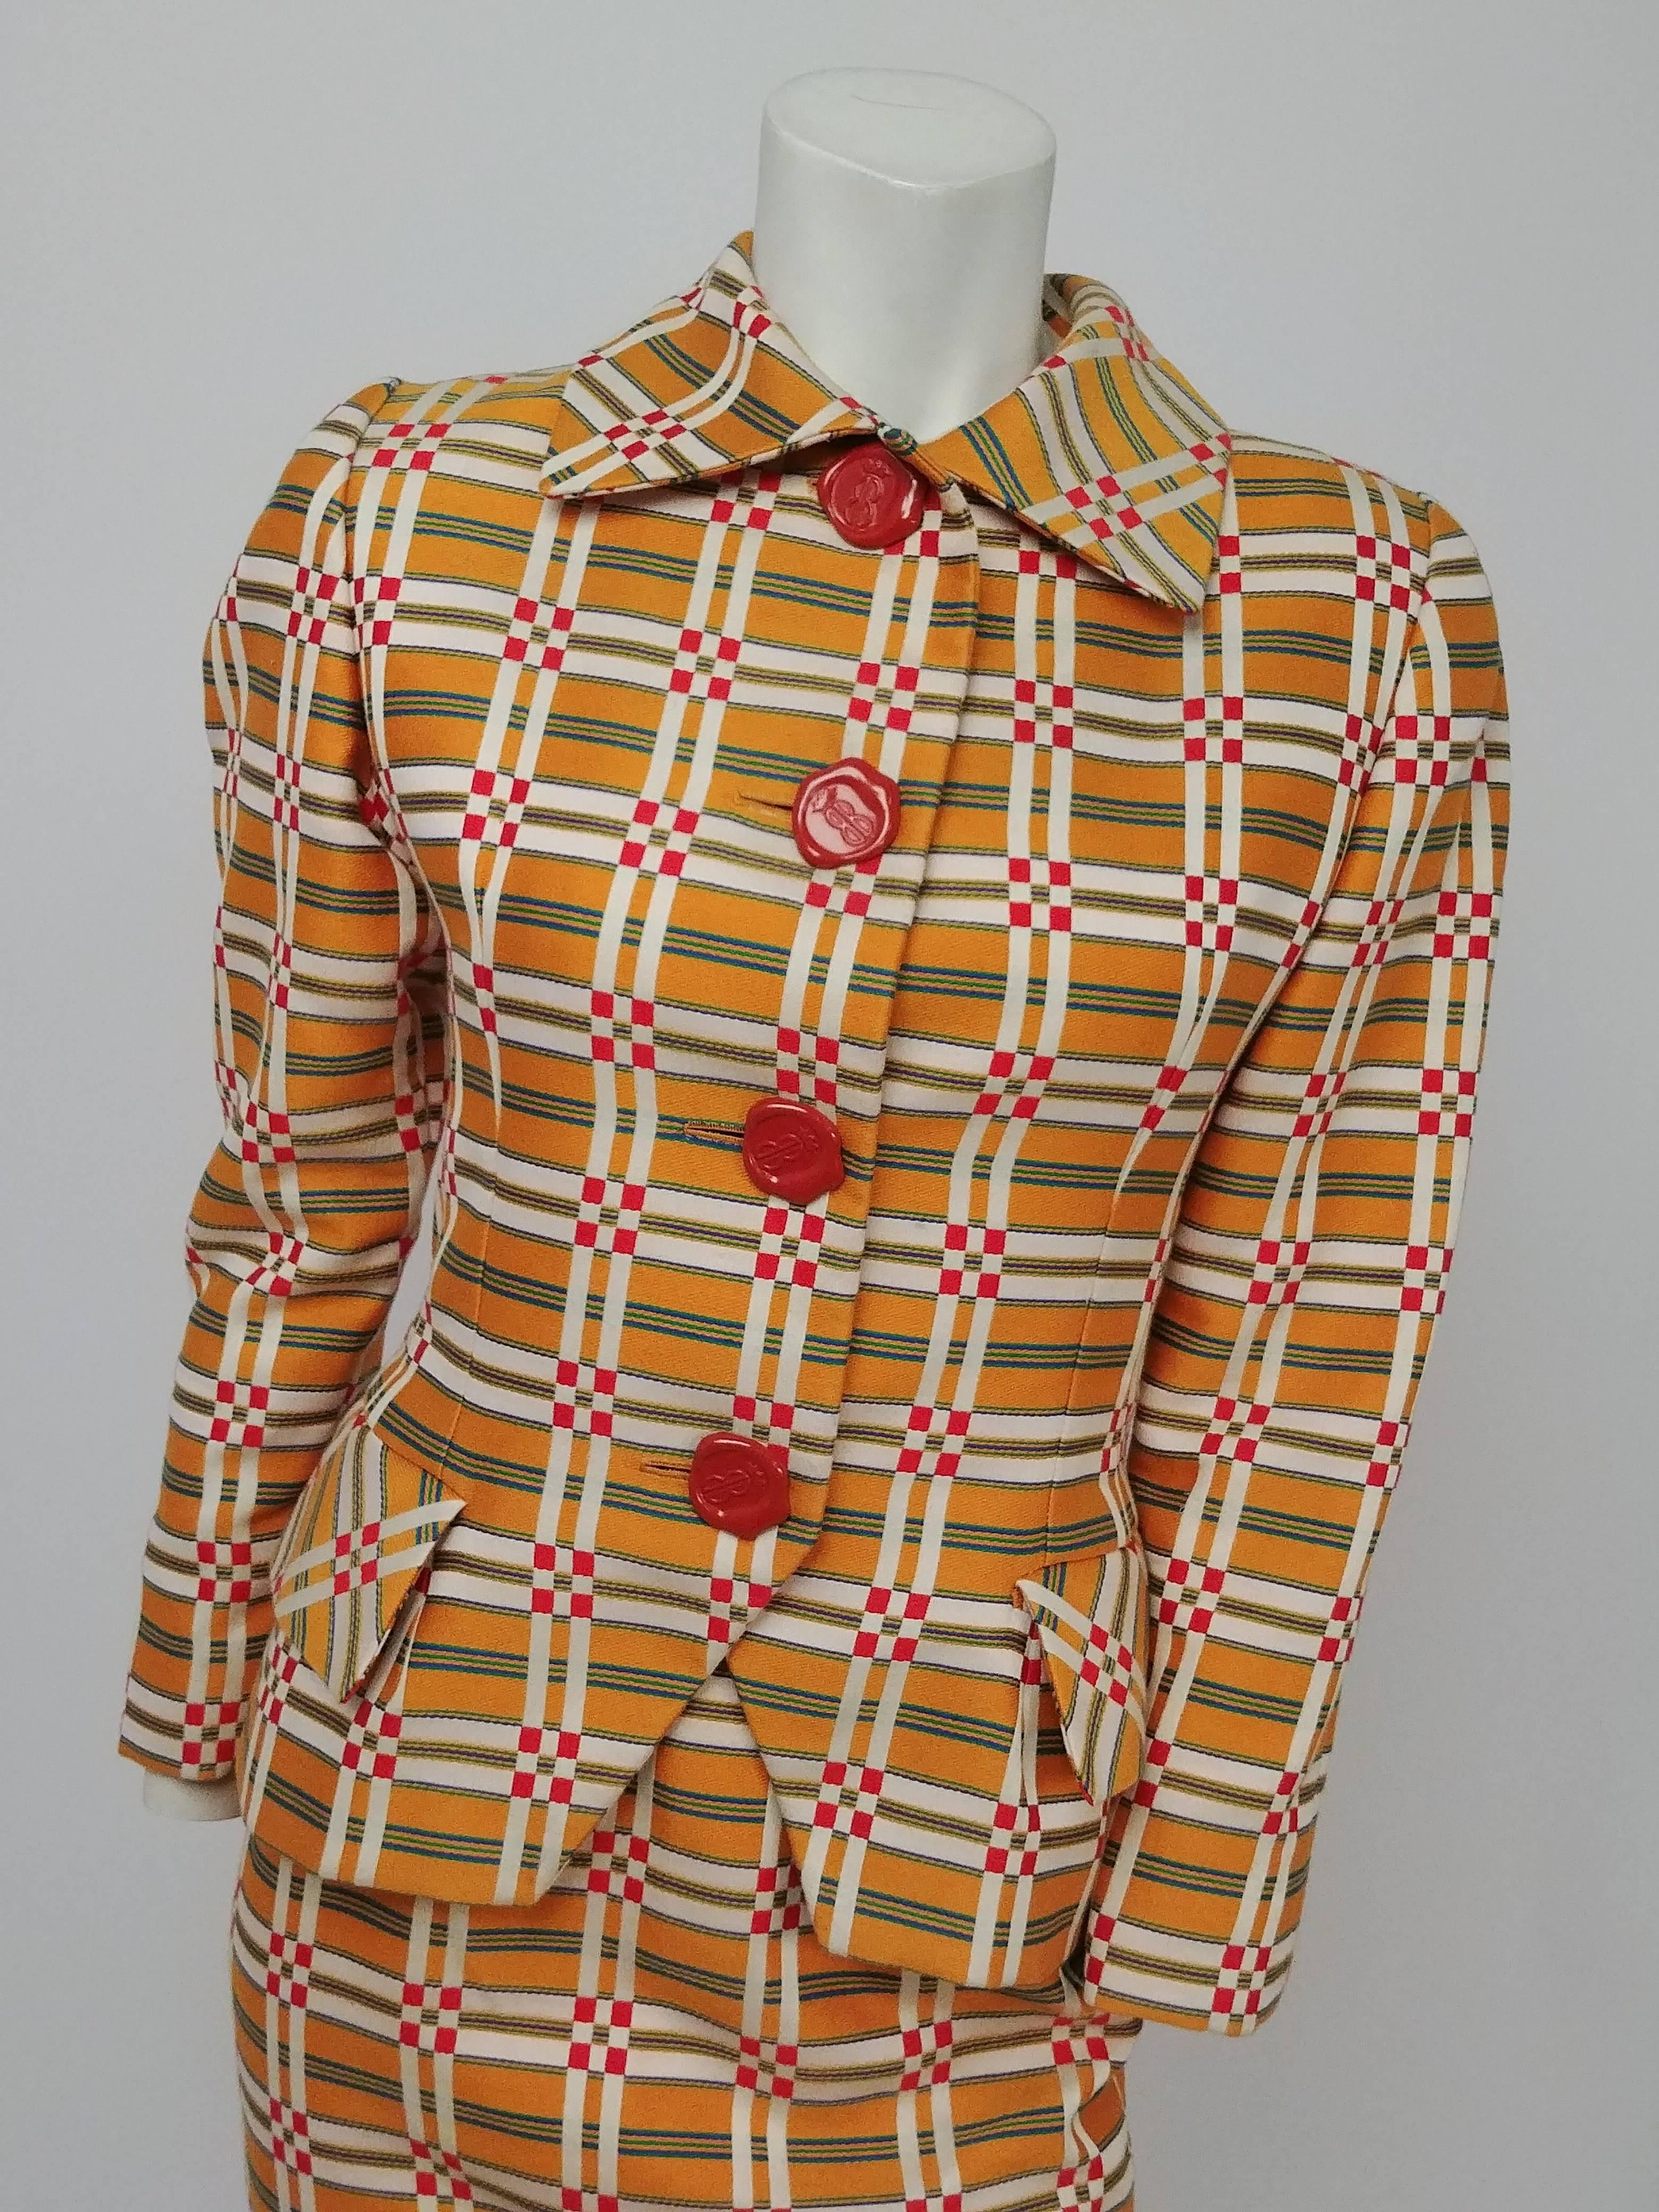 1980s Bill Blass Orange Plaid Skirt Suit w/ Wax Seal Buttons. Bright and colorful Bill Blass suit consists of jacket with rounded collar and skirt. Jacket has padded shoulders and big decorative red buttons that look like wax seals. 